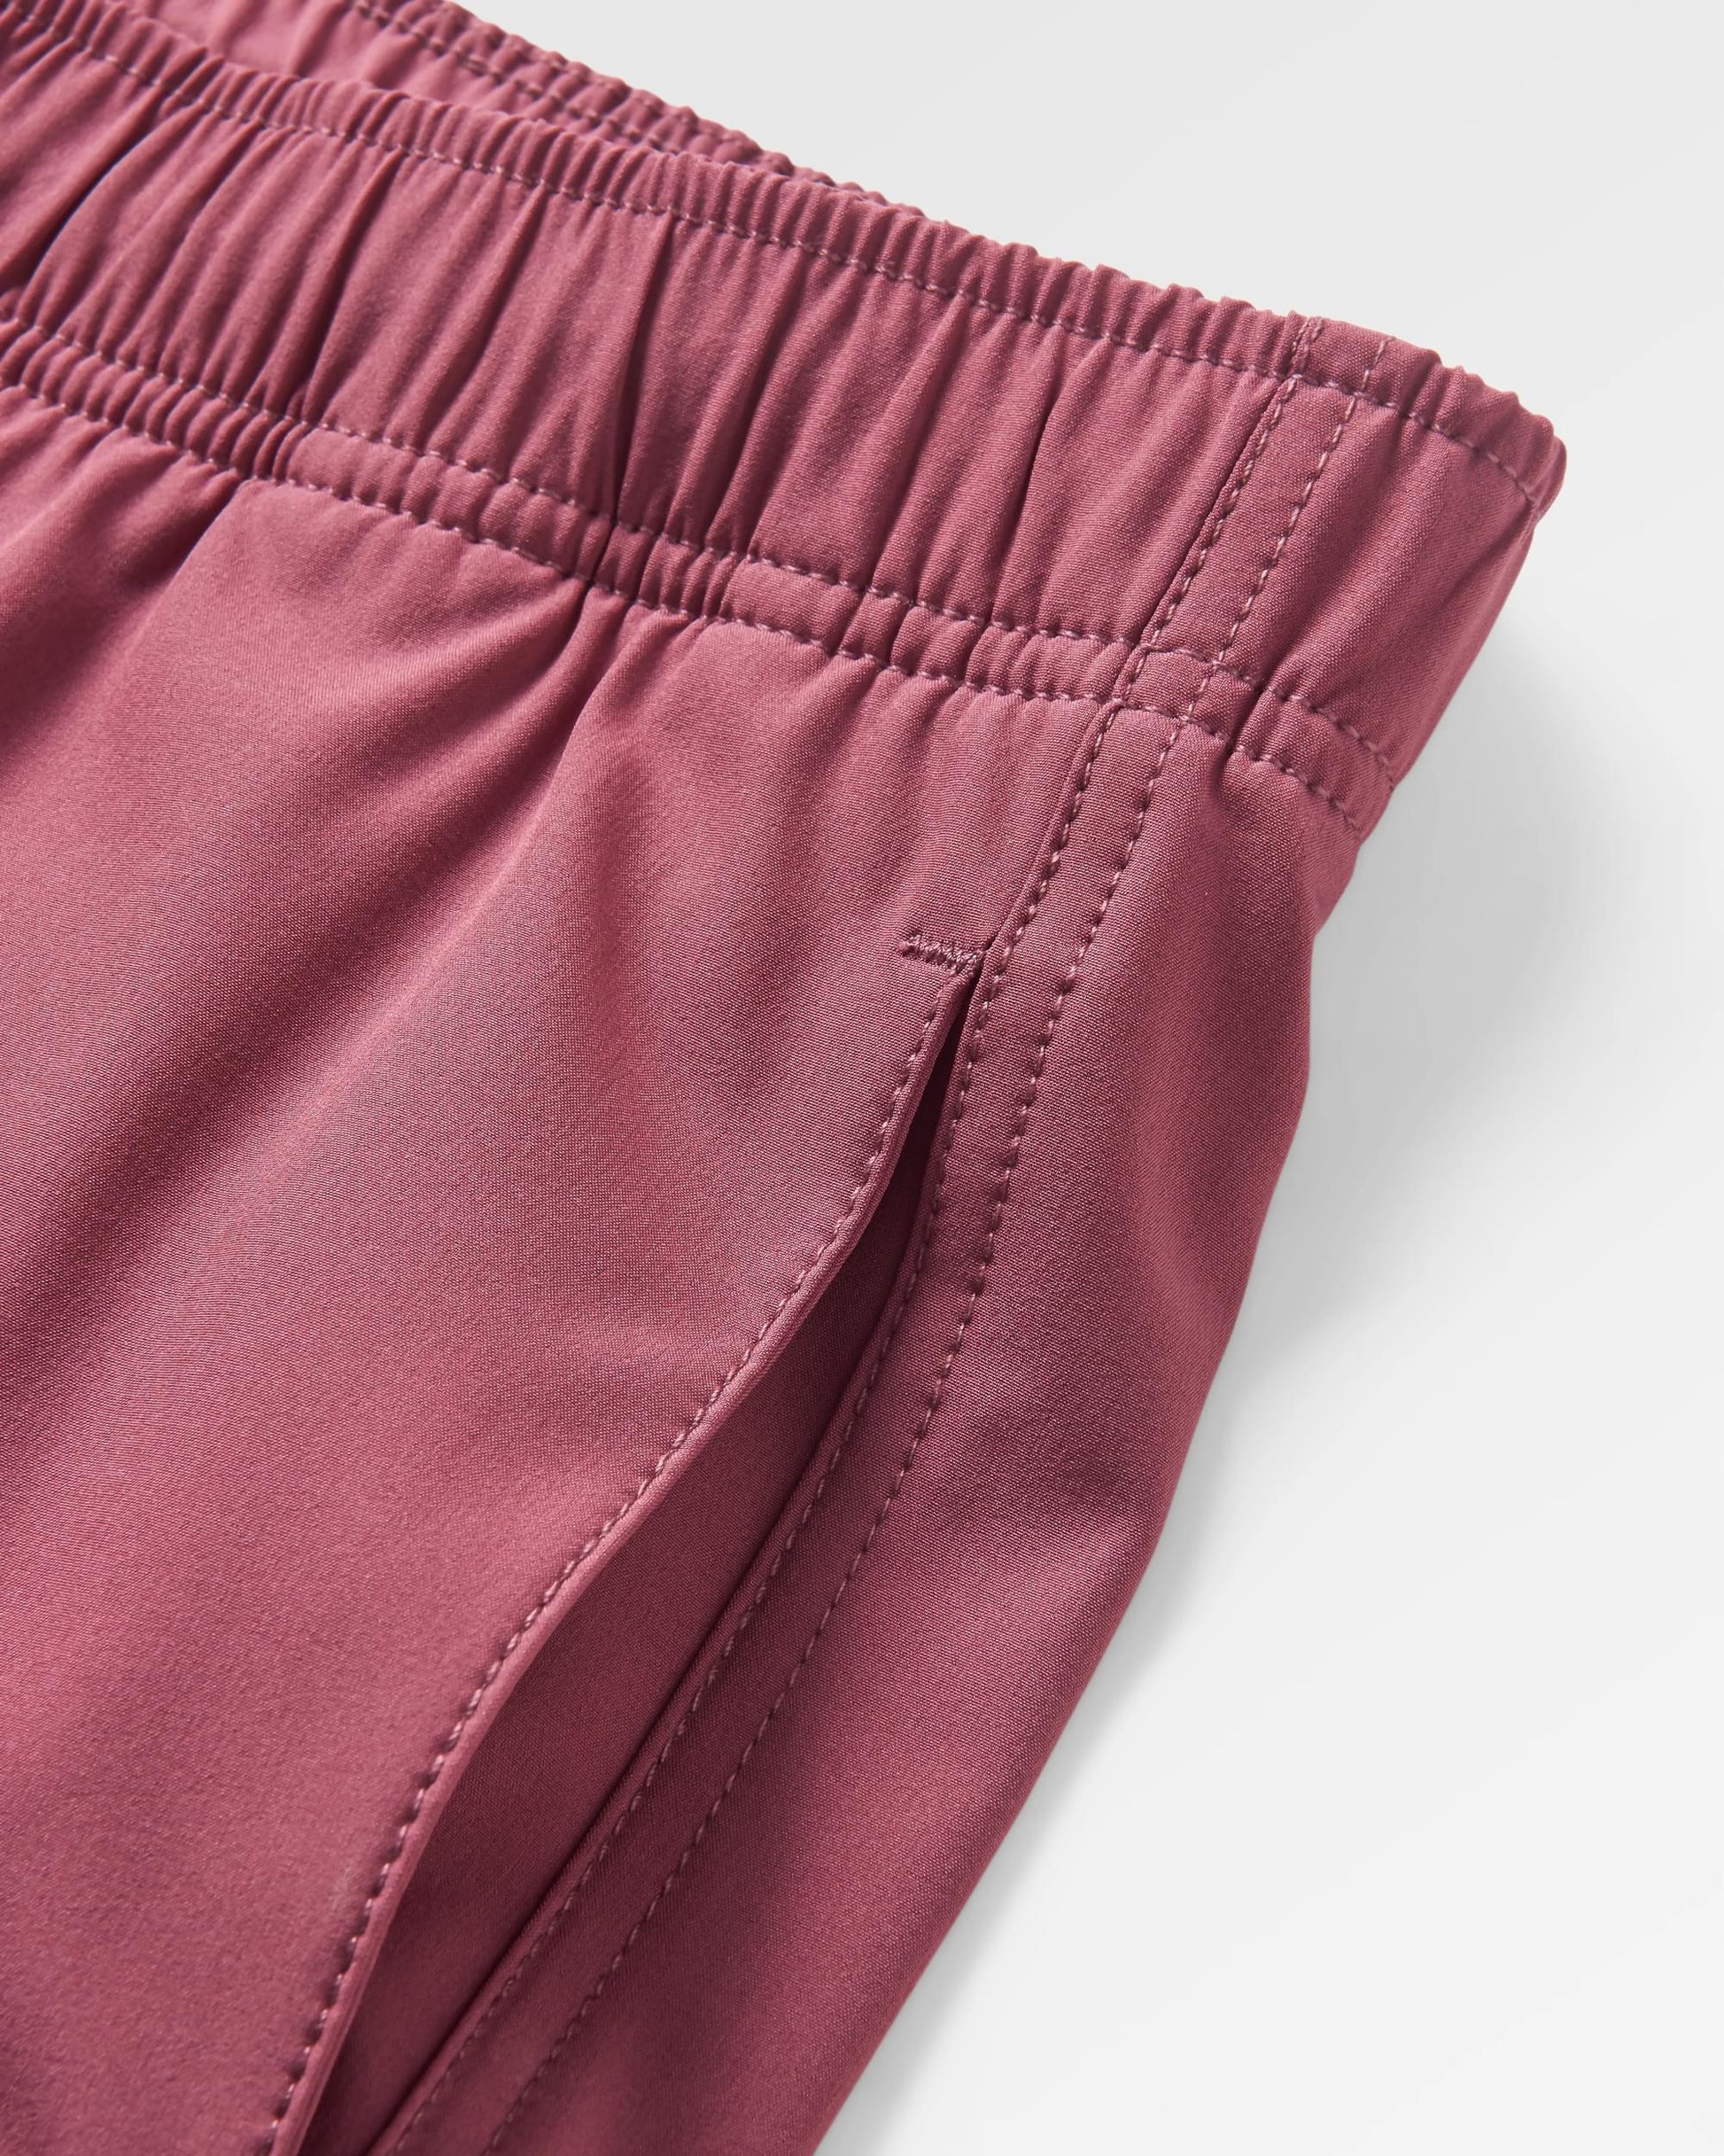 Porto Recycled All Purpose Swim Short - Crushed Berry